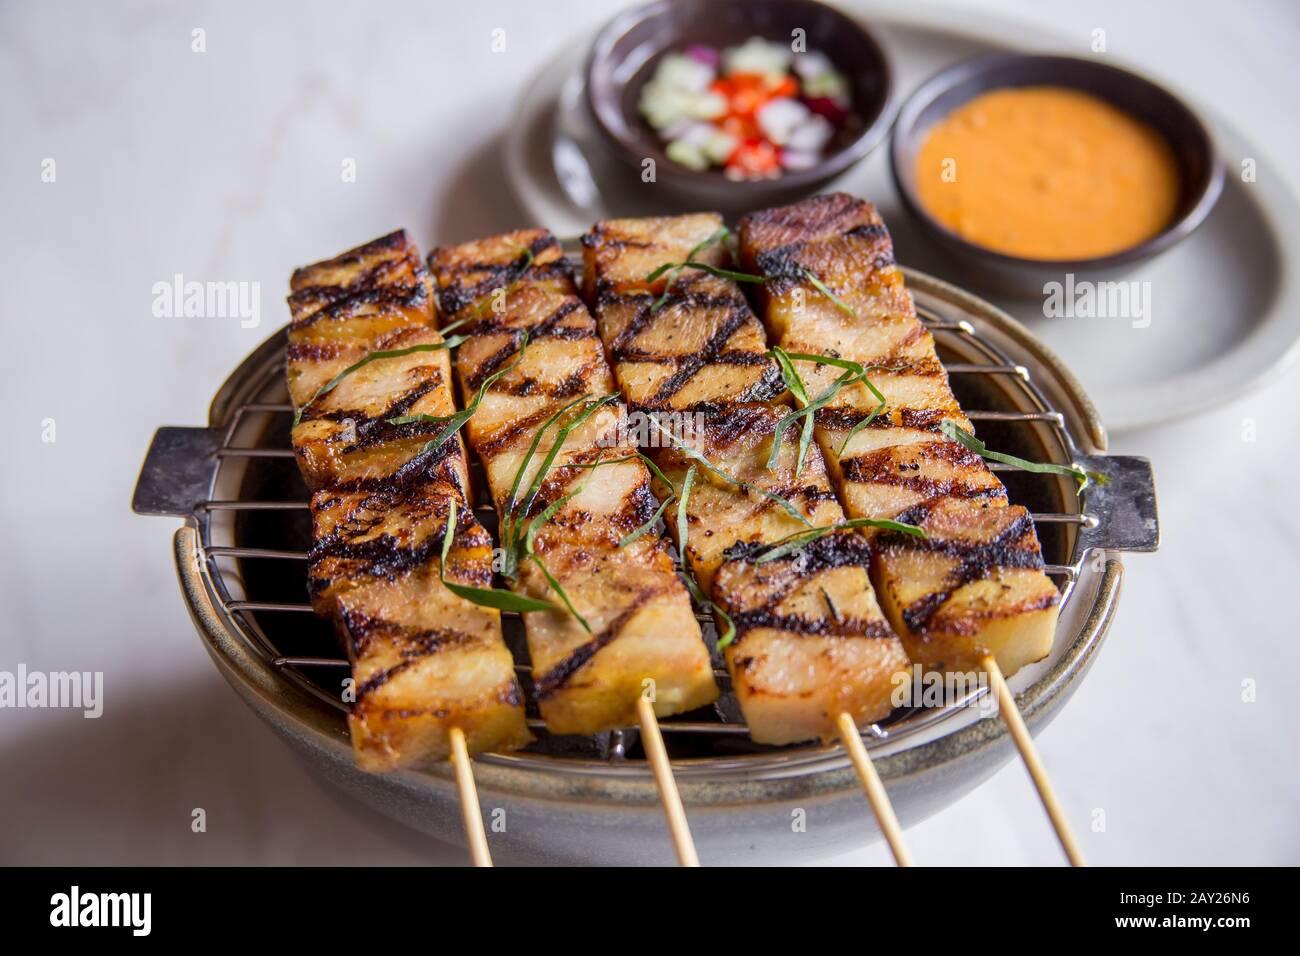 Thai food is characterized by lightly prepared dishes with Sataaromatic components and a spicy edge. This is pork satay with vinegar and peanut sauce. Stock Photo